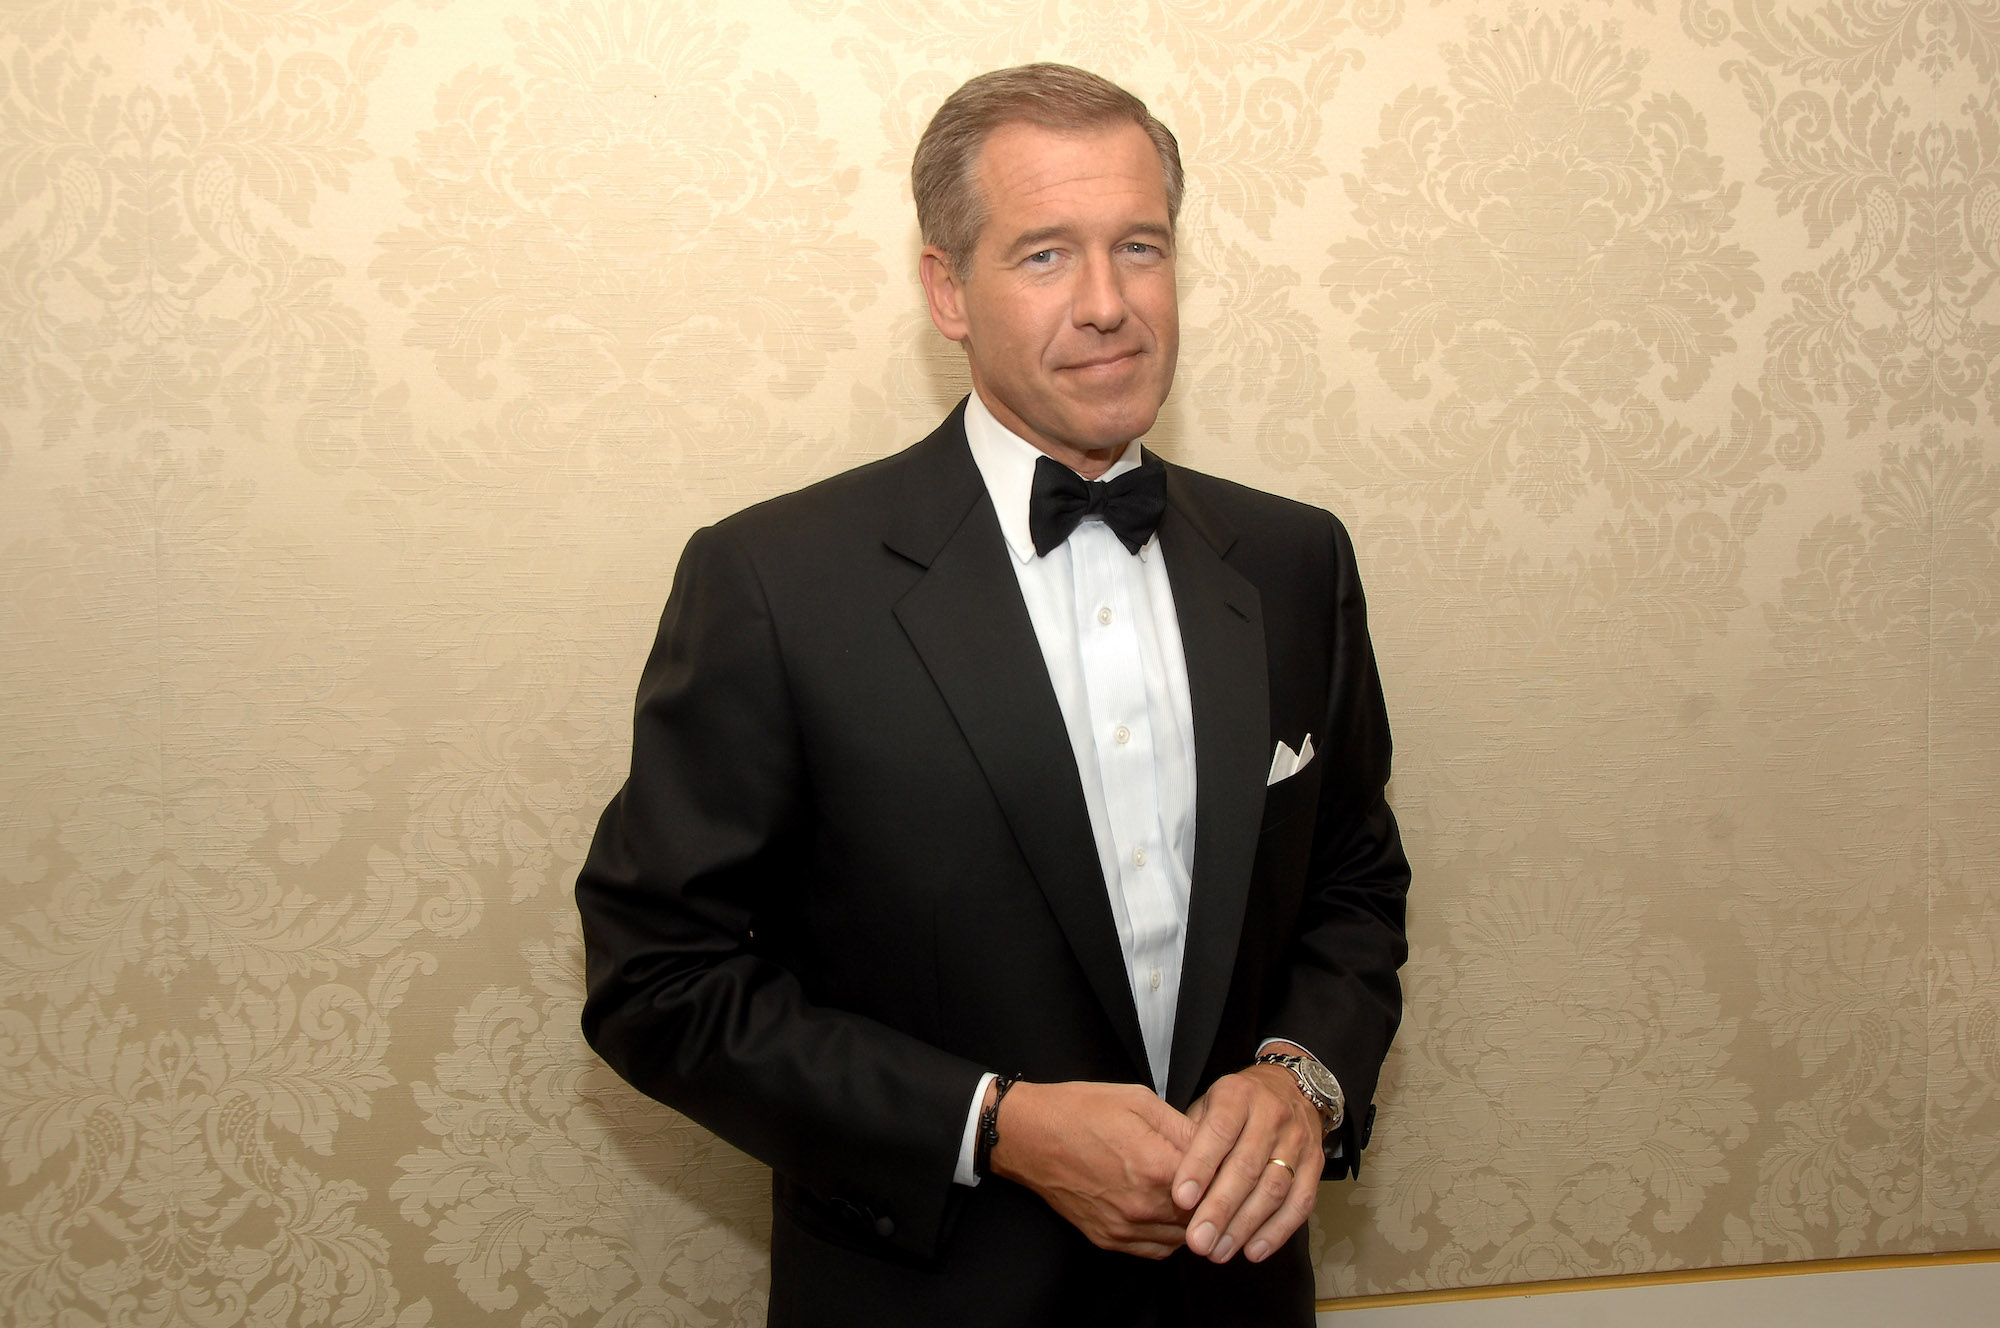 Brian Williams smiling at the camera in front of a gold wall